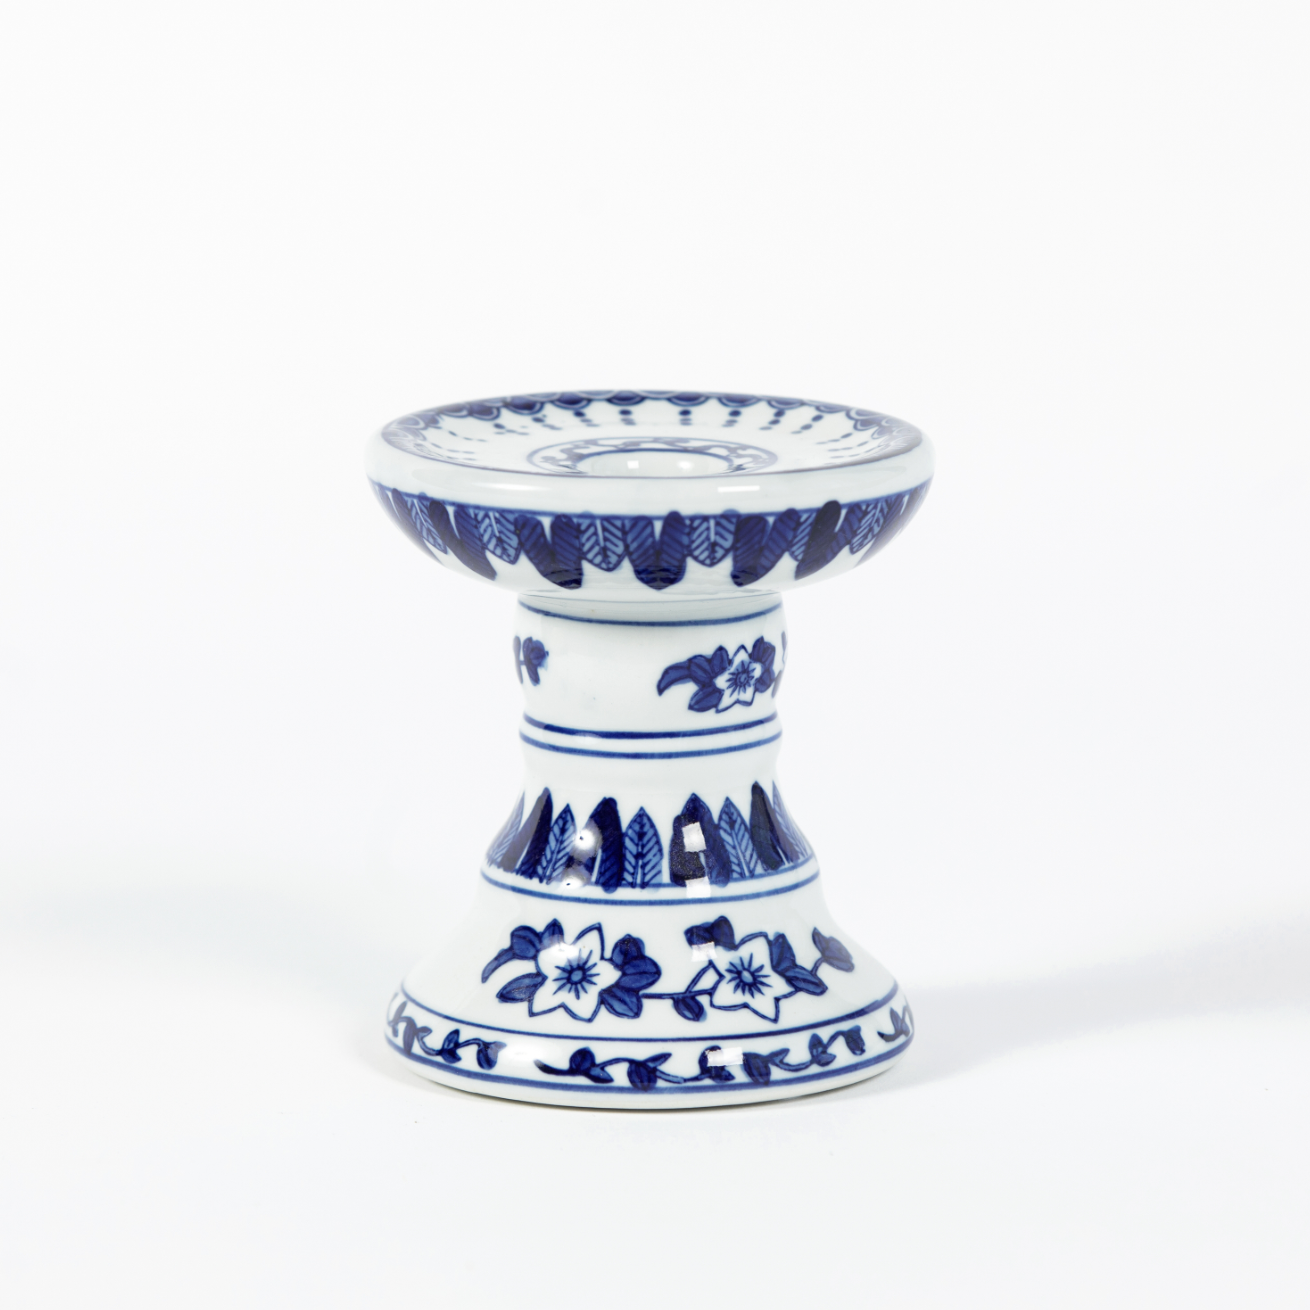 Candle Holders Pep Home Candlestick Blue White Stone Candleholder  Mediterranean Style Supply Sea Decorations Home Decorative Crafts Pillar  Glass From Liyaozan66, $22.21